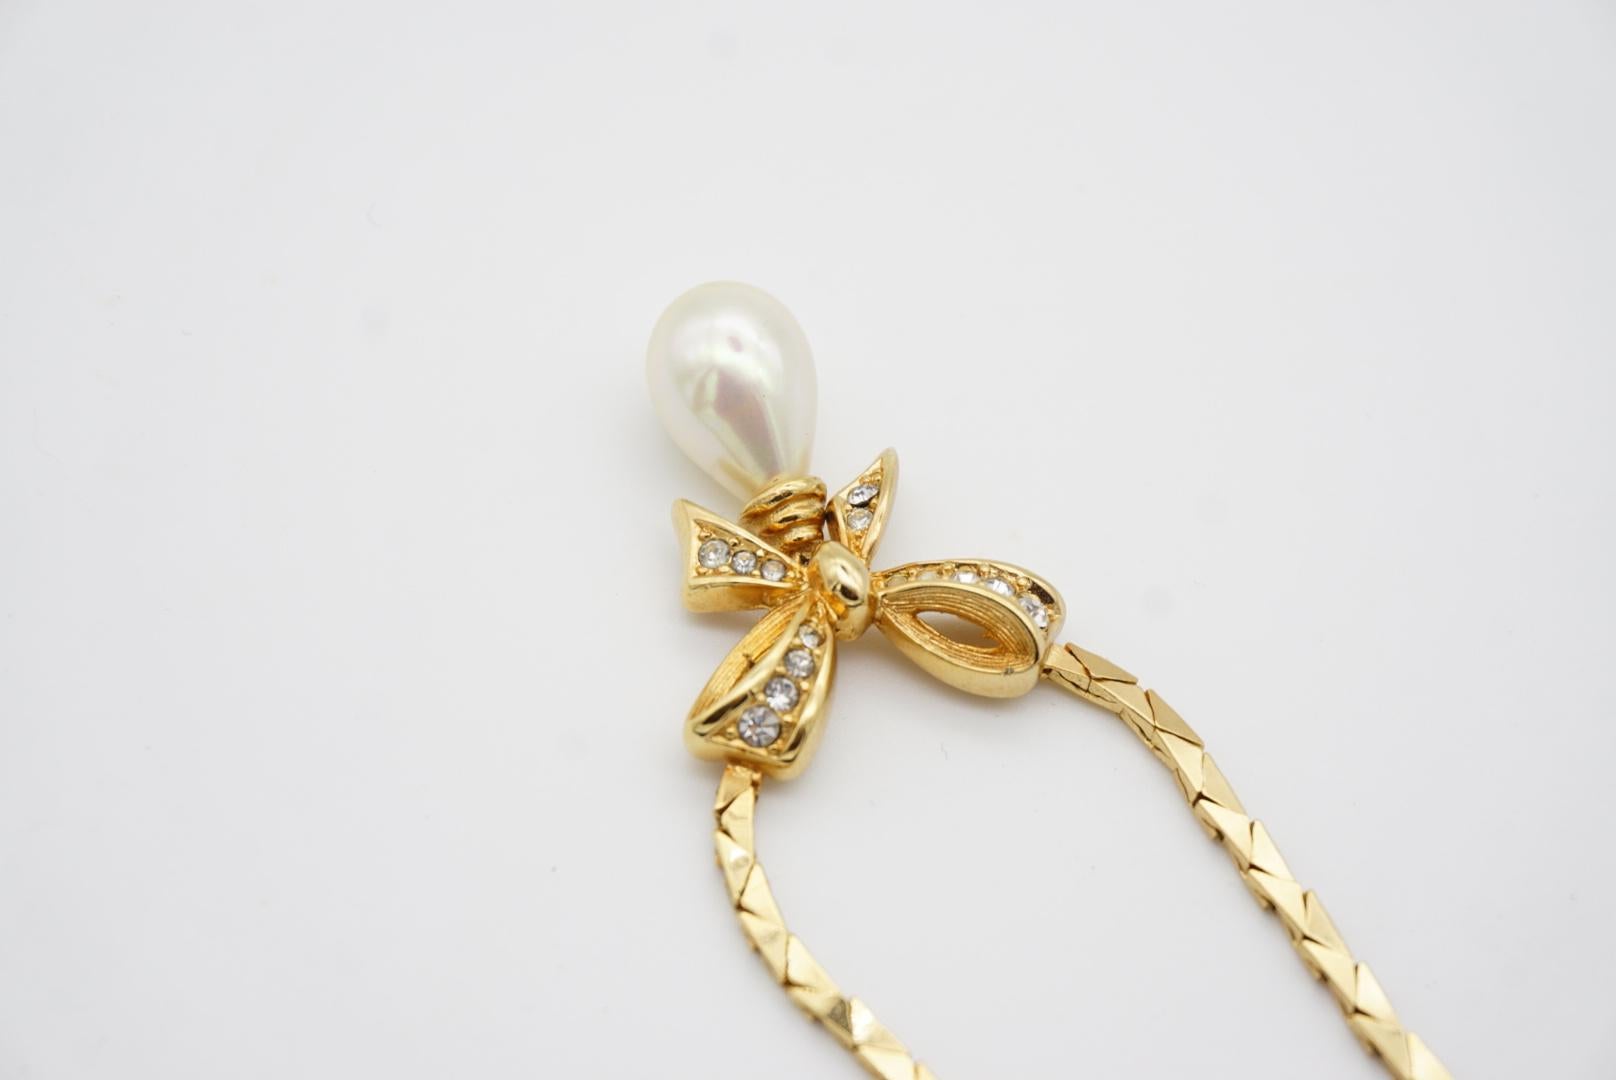 Christian Dior Vintage 1980s Knot Bow Water Drop Pearl Crystals Pendant Necklace For Sale 6